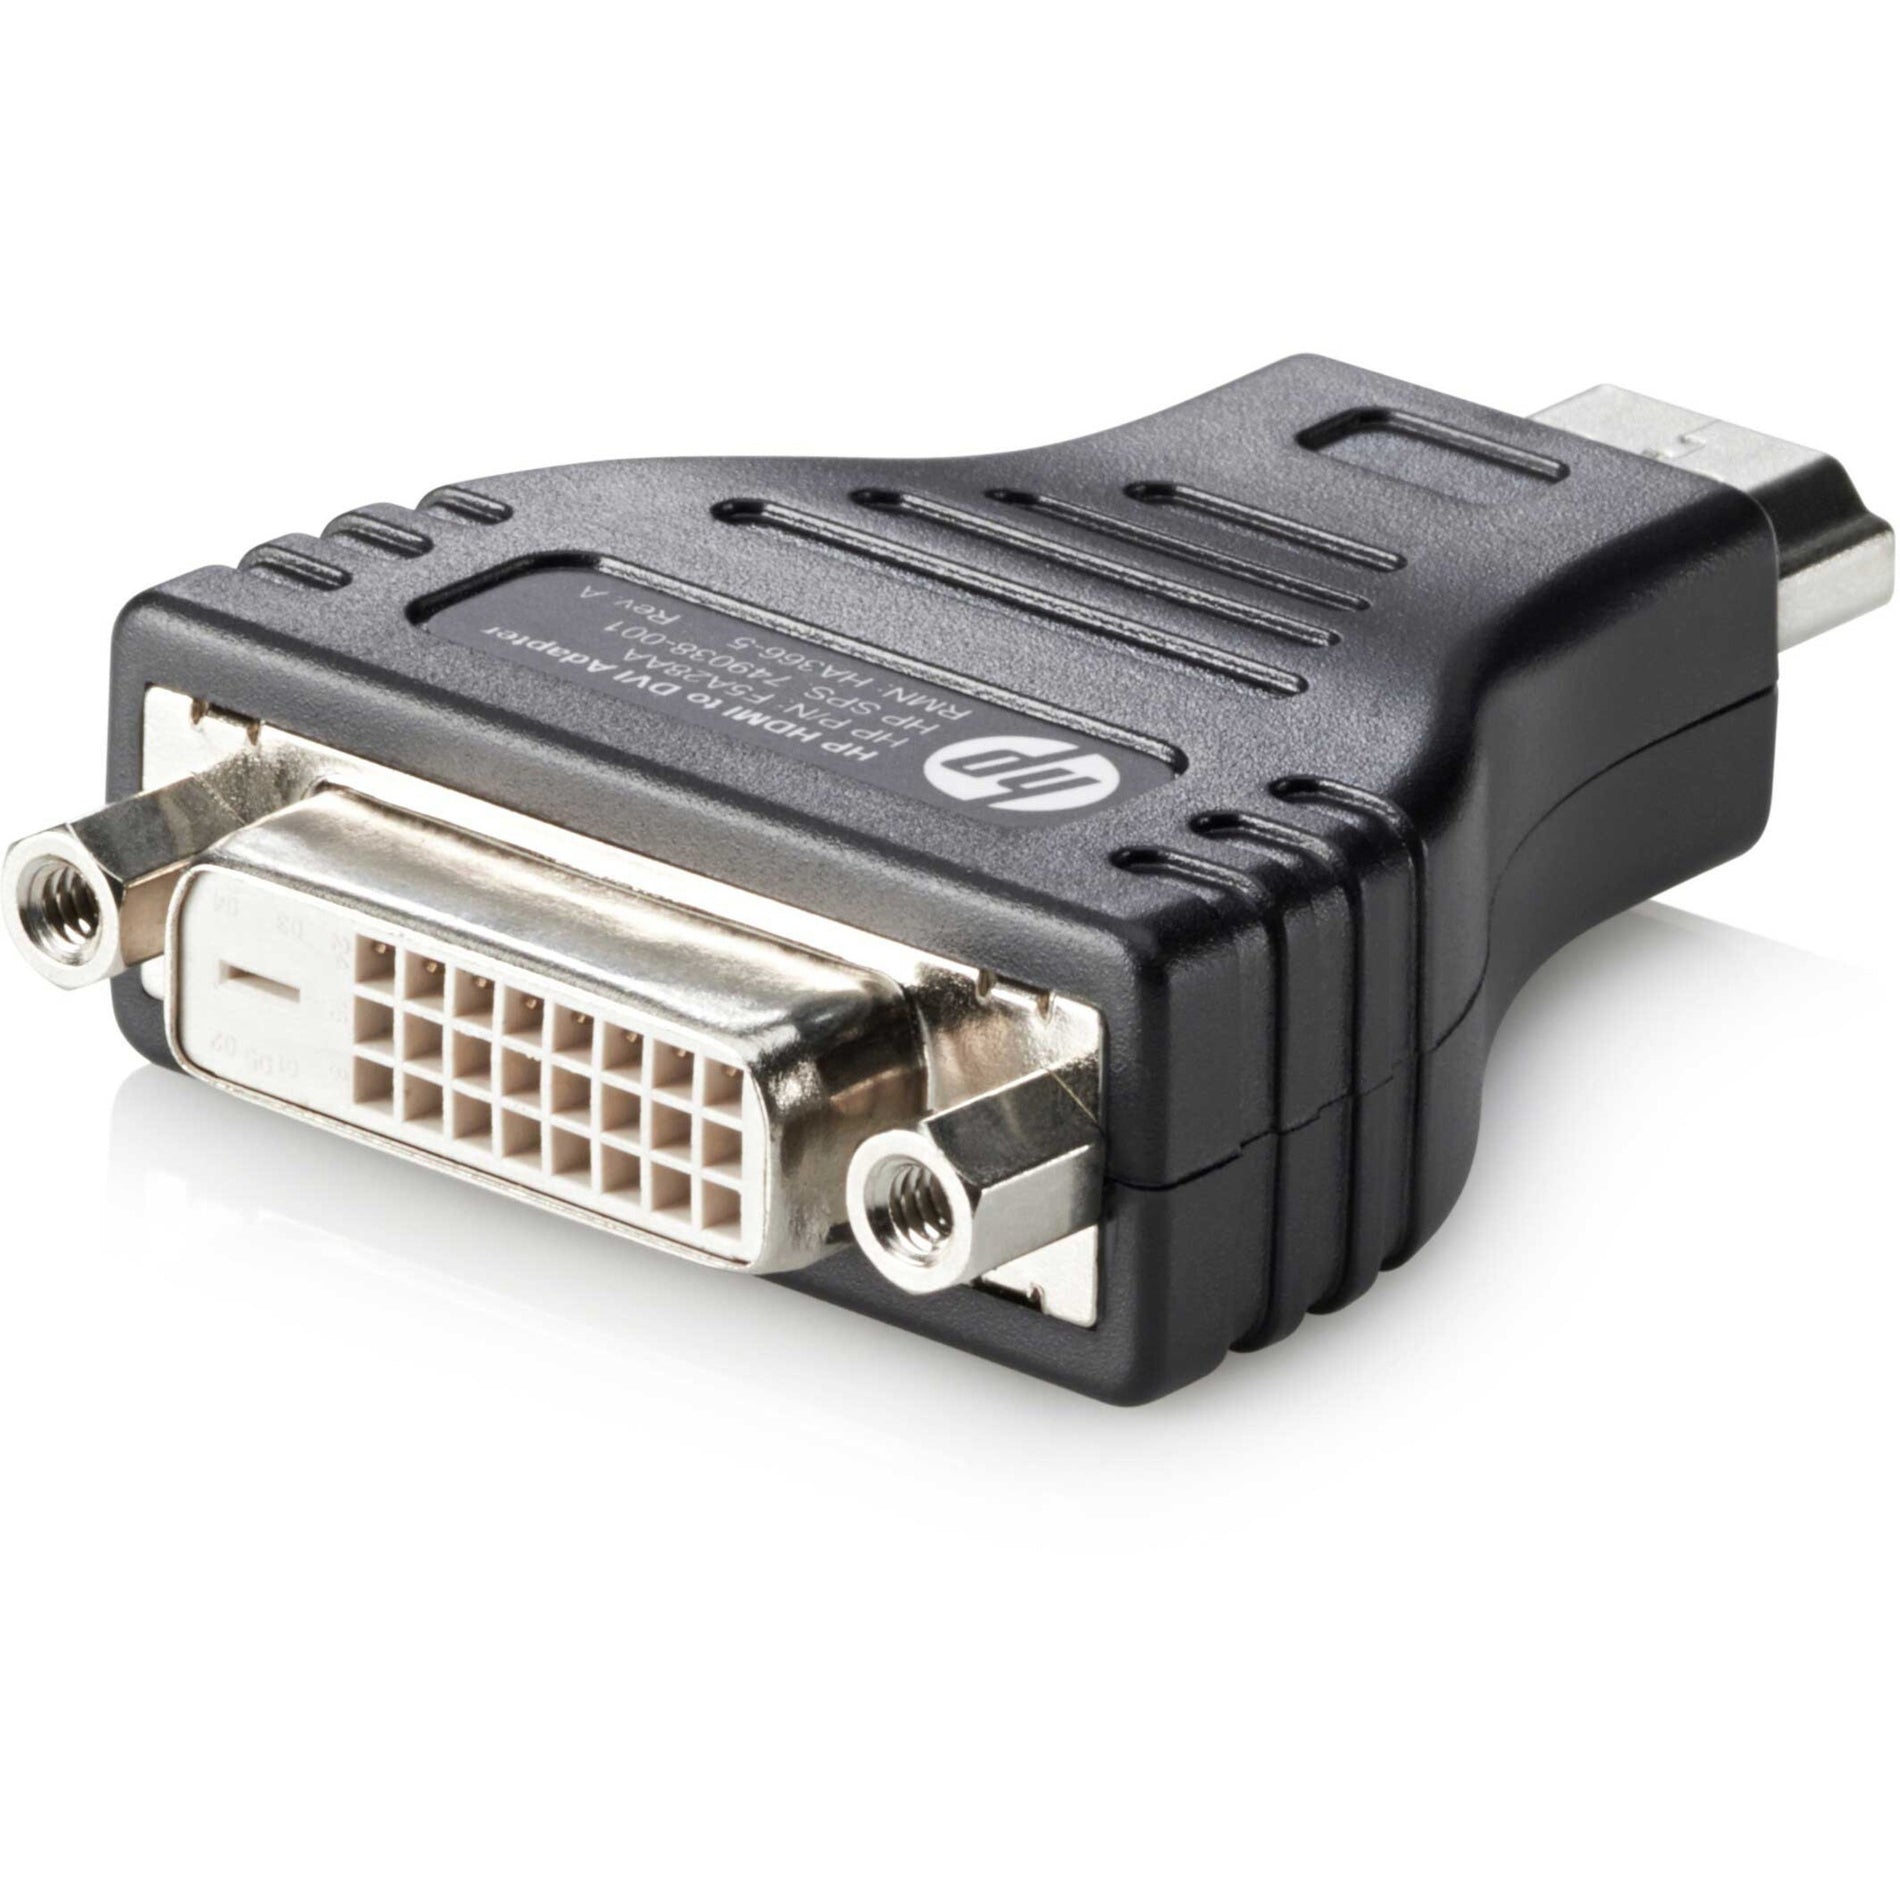 HP F5A28AA HDMI to DVI Adapter, Video Adapter for Connecting HDMI Devices to DVI Displays [Discontinued]